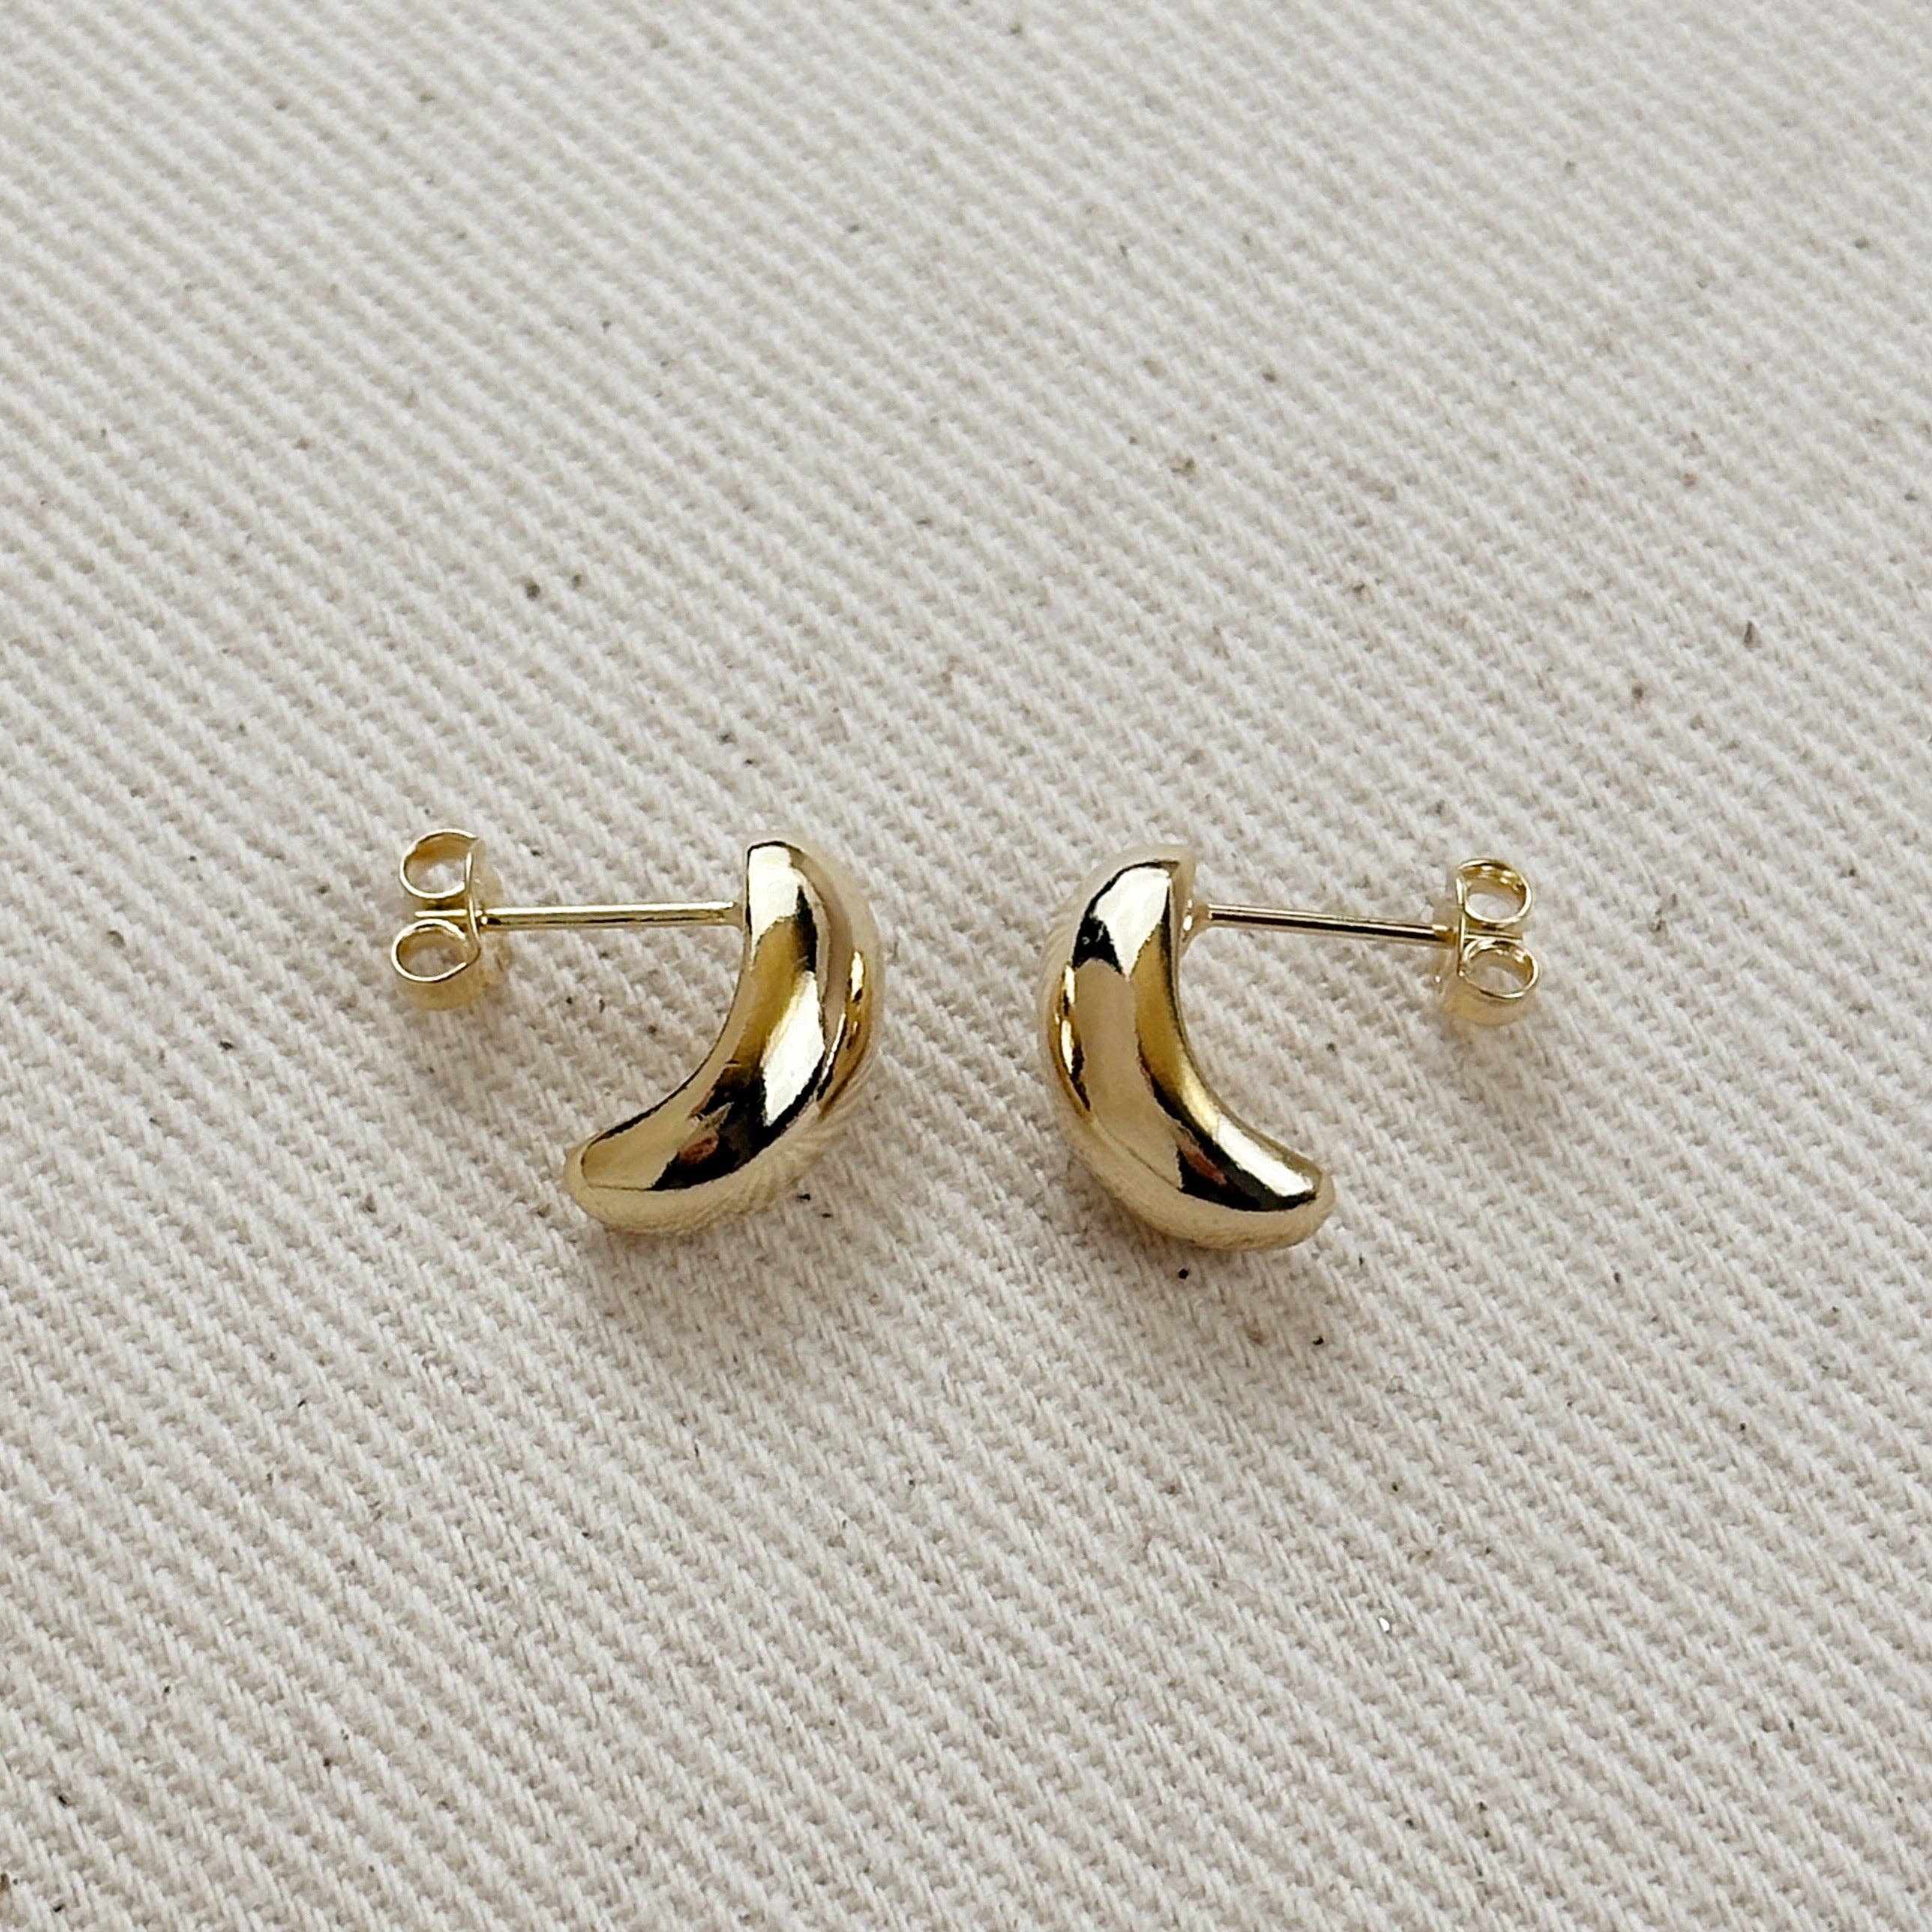 Earring 18k GF Curved Small Stud